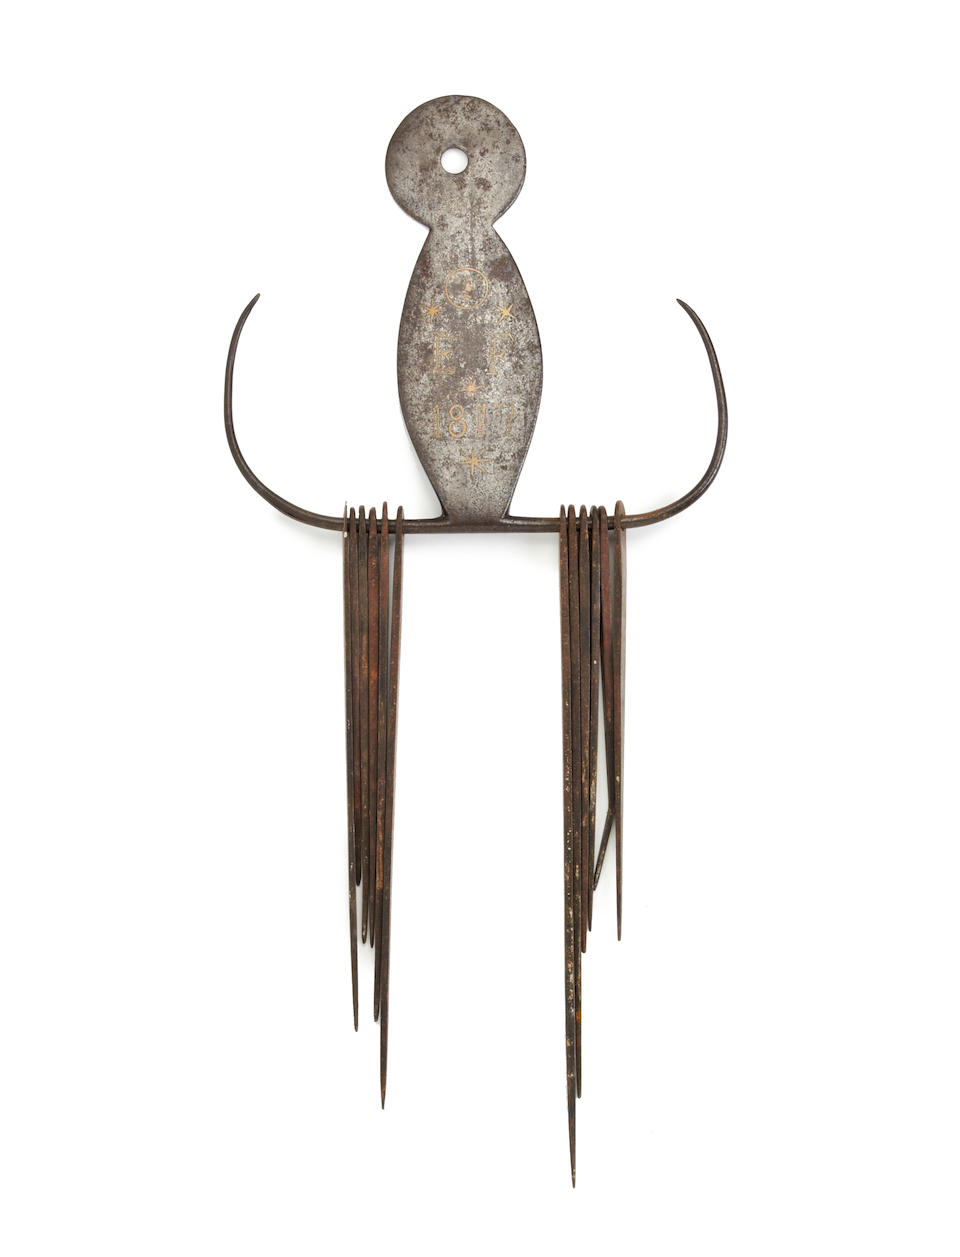 A rare Regency brass-inlaid wrought iron or steel skewer holder, dated 1817, with ten skewers